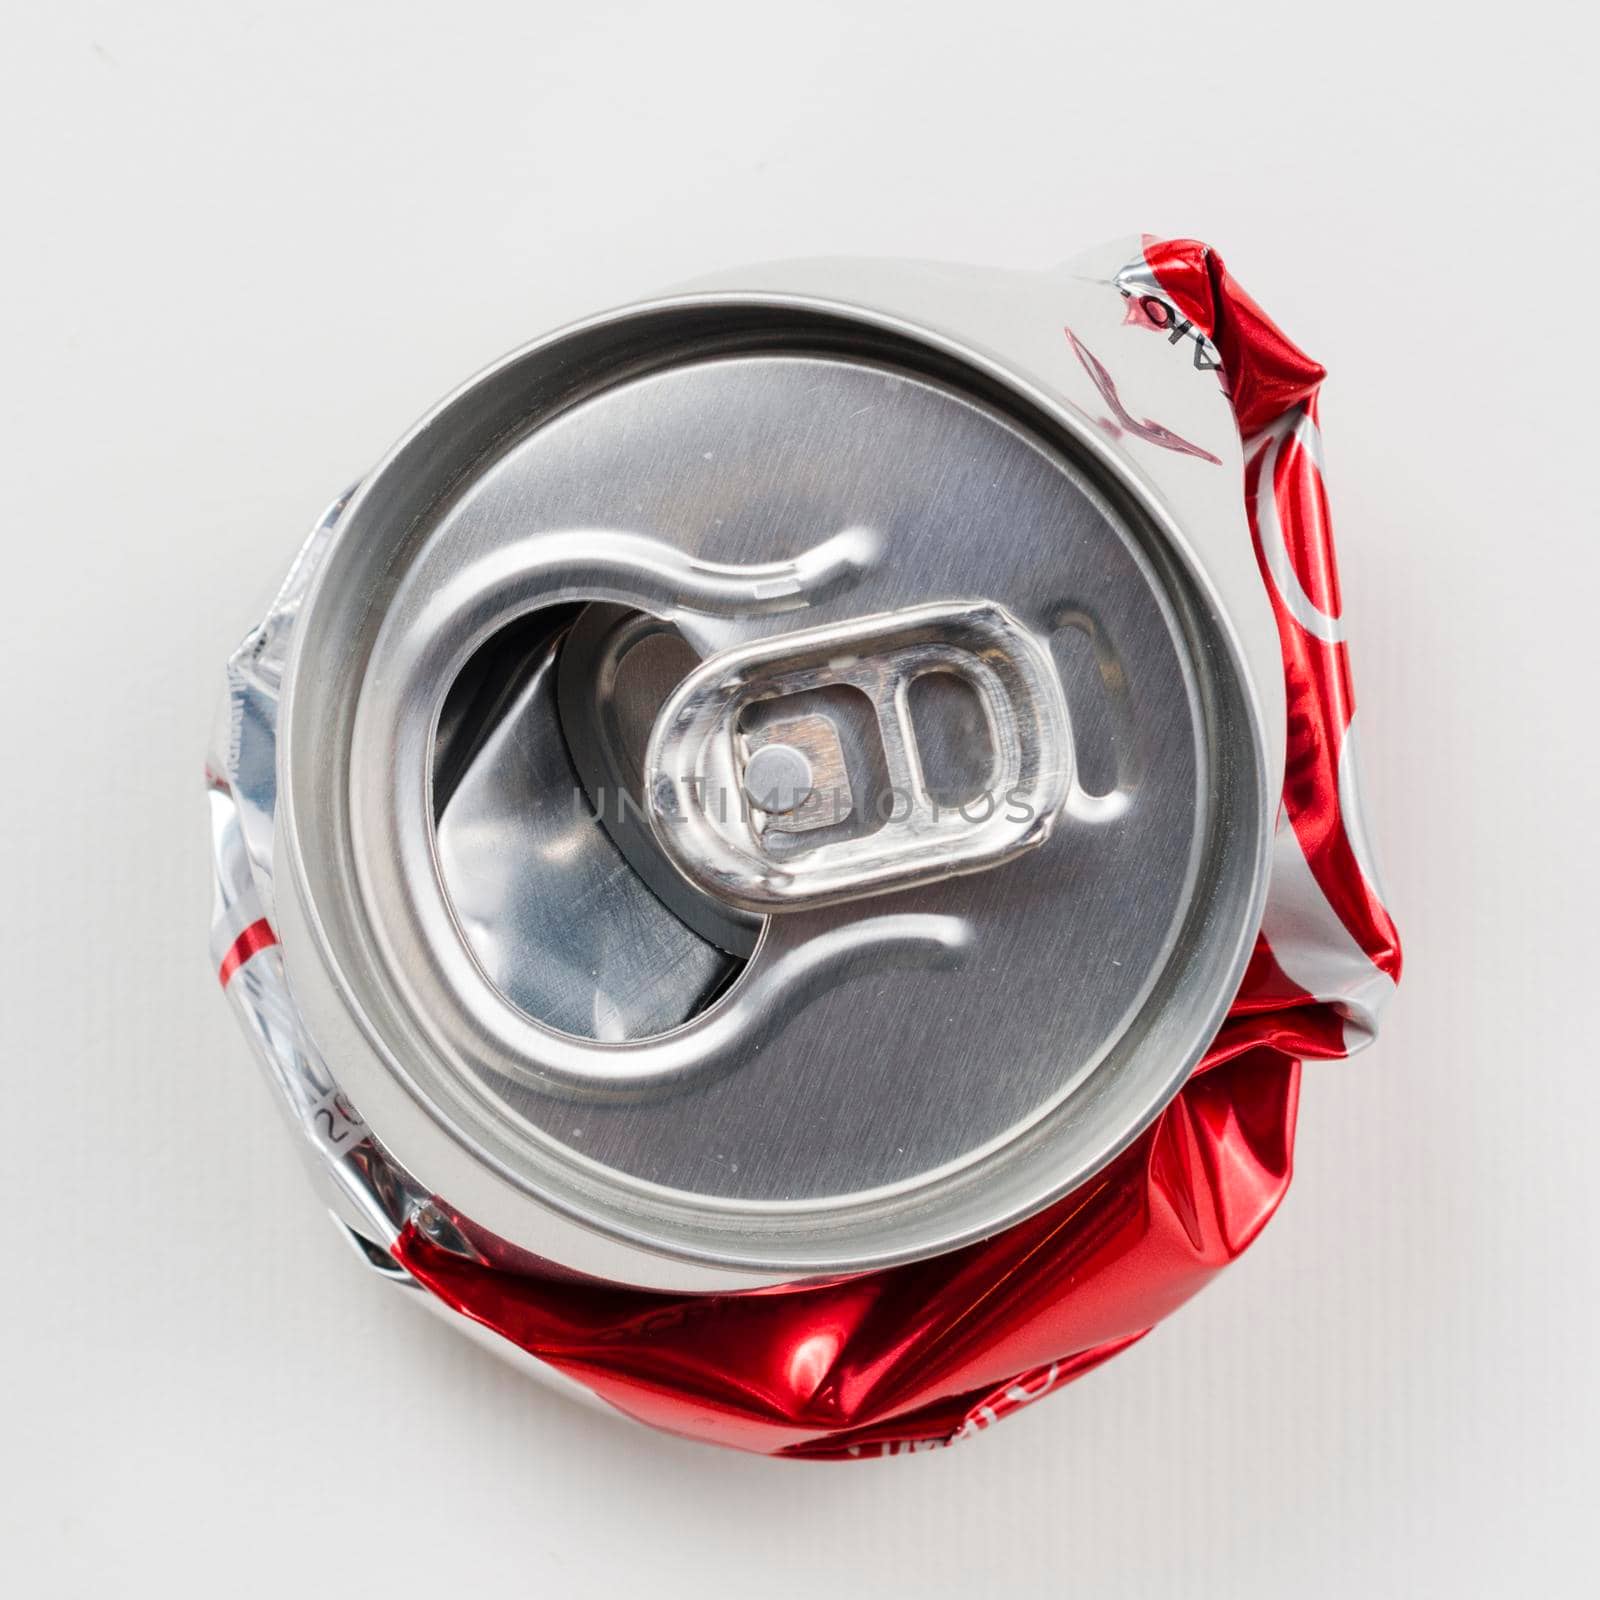 crumpled drink can grey background. High resolution photo